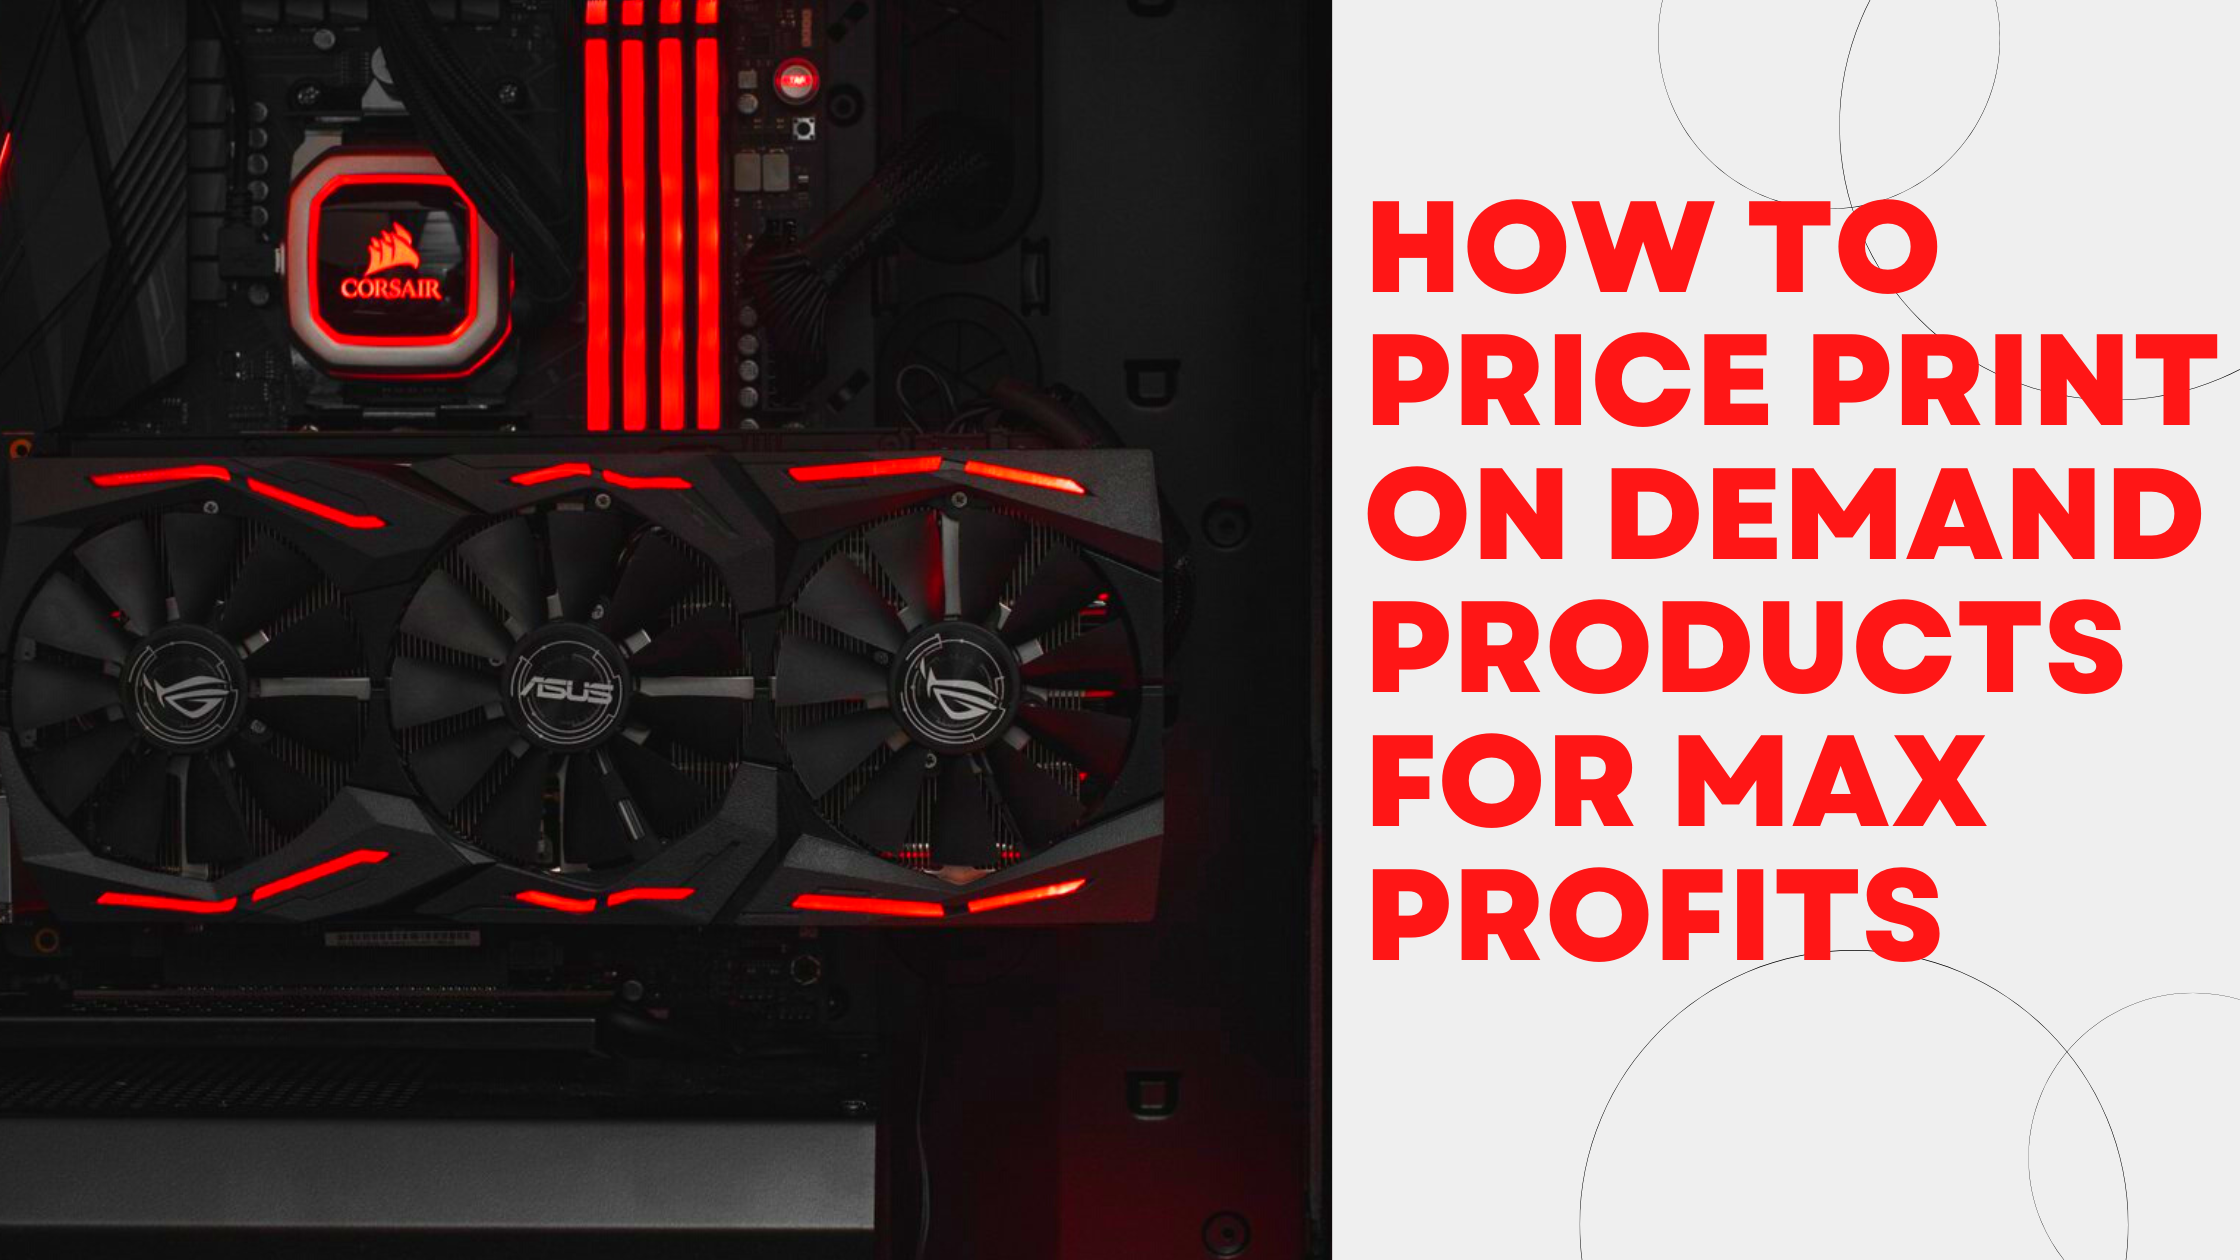 How to Price Your Print on Demand Products for Maximum Profit